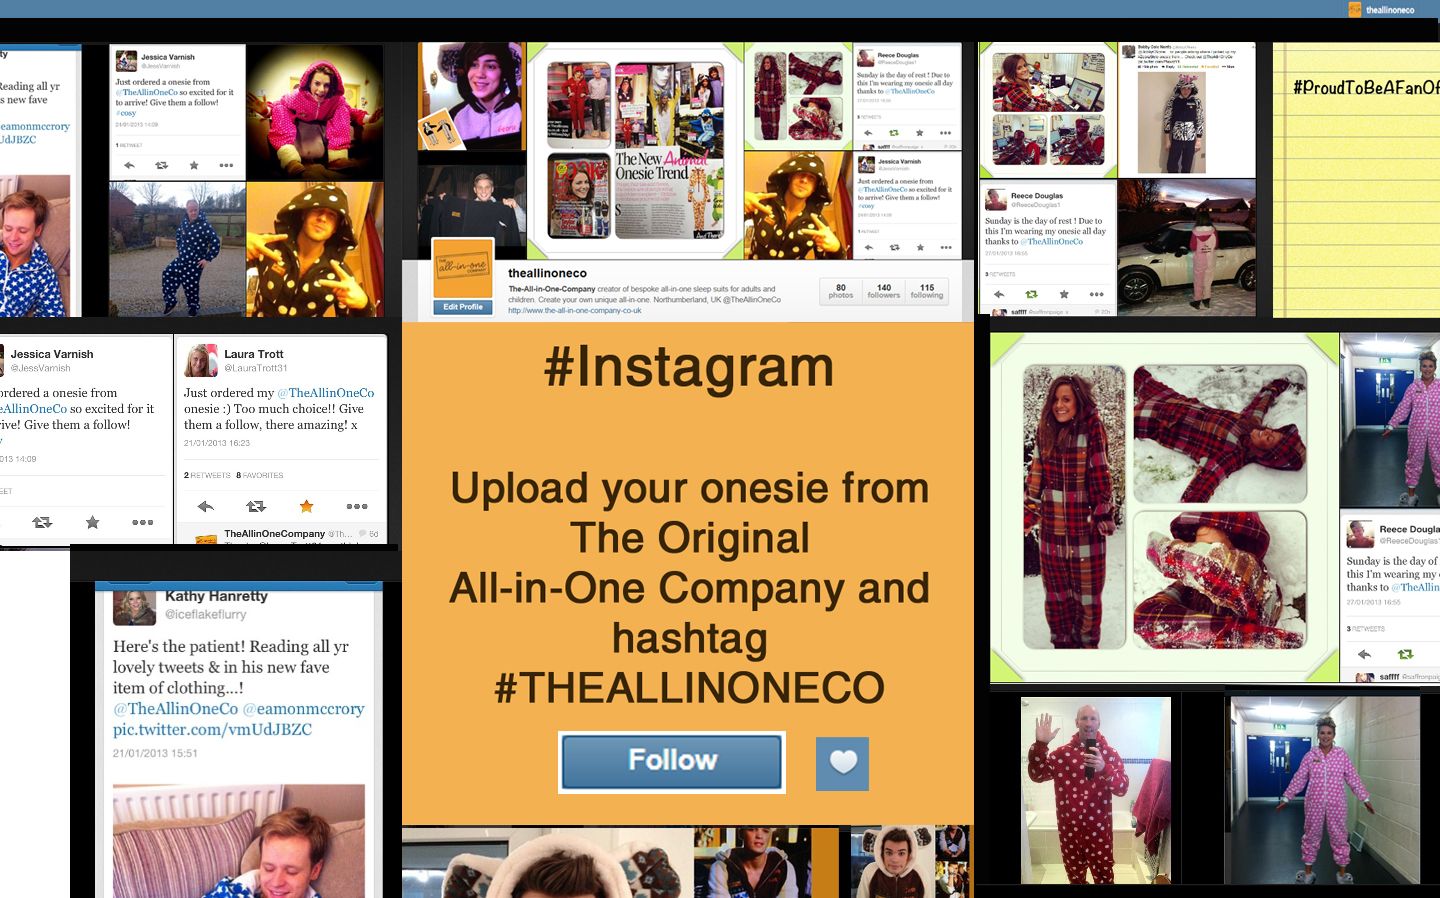 Follow The All-in-One Company on Instagram - Spread the Onesie Love